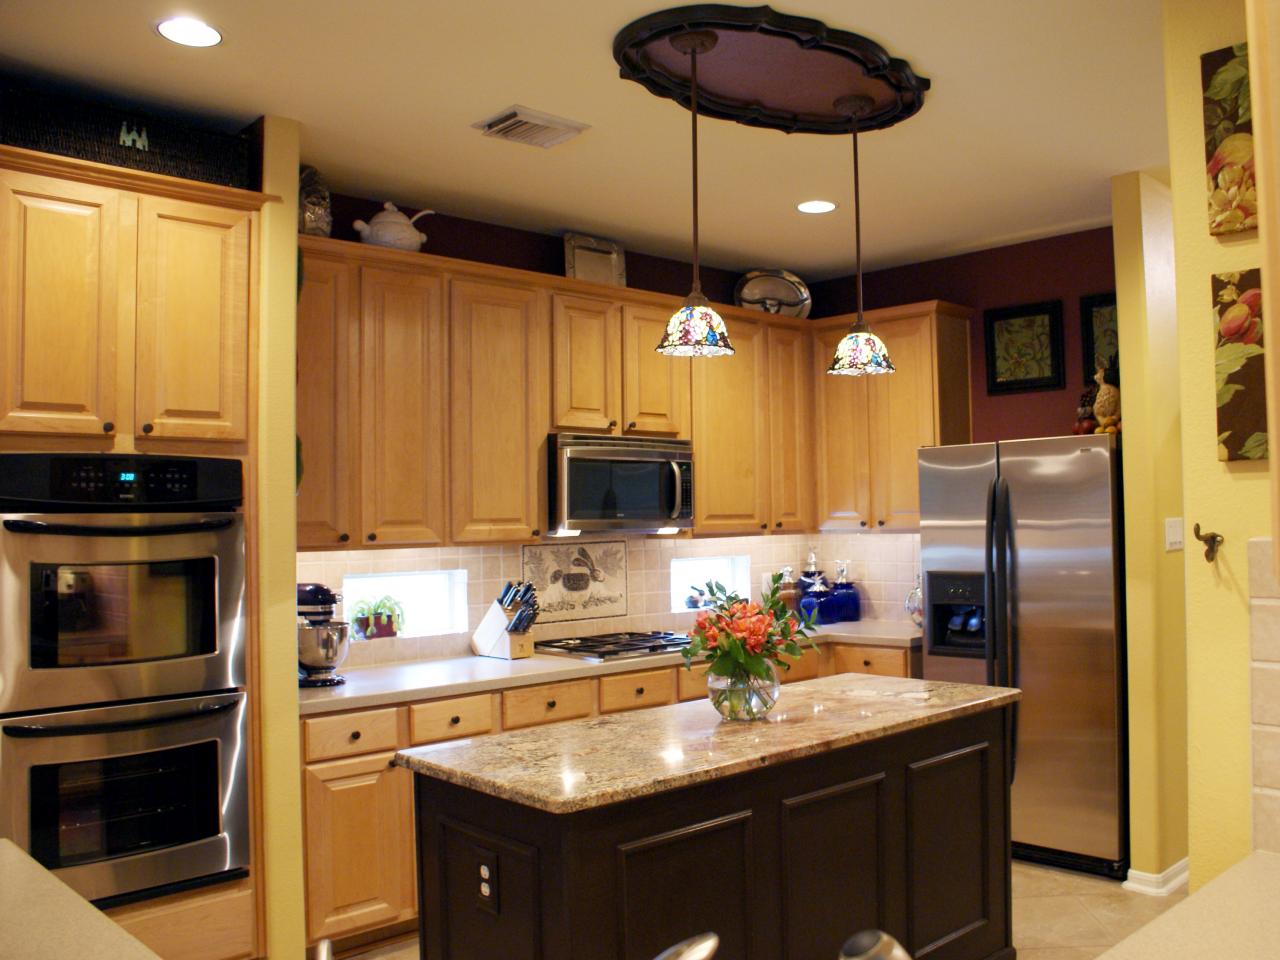 Cabinets Should You Replace Or Reface, Can Cabinet Doors Be Replaced